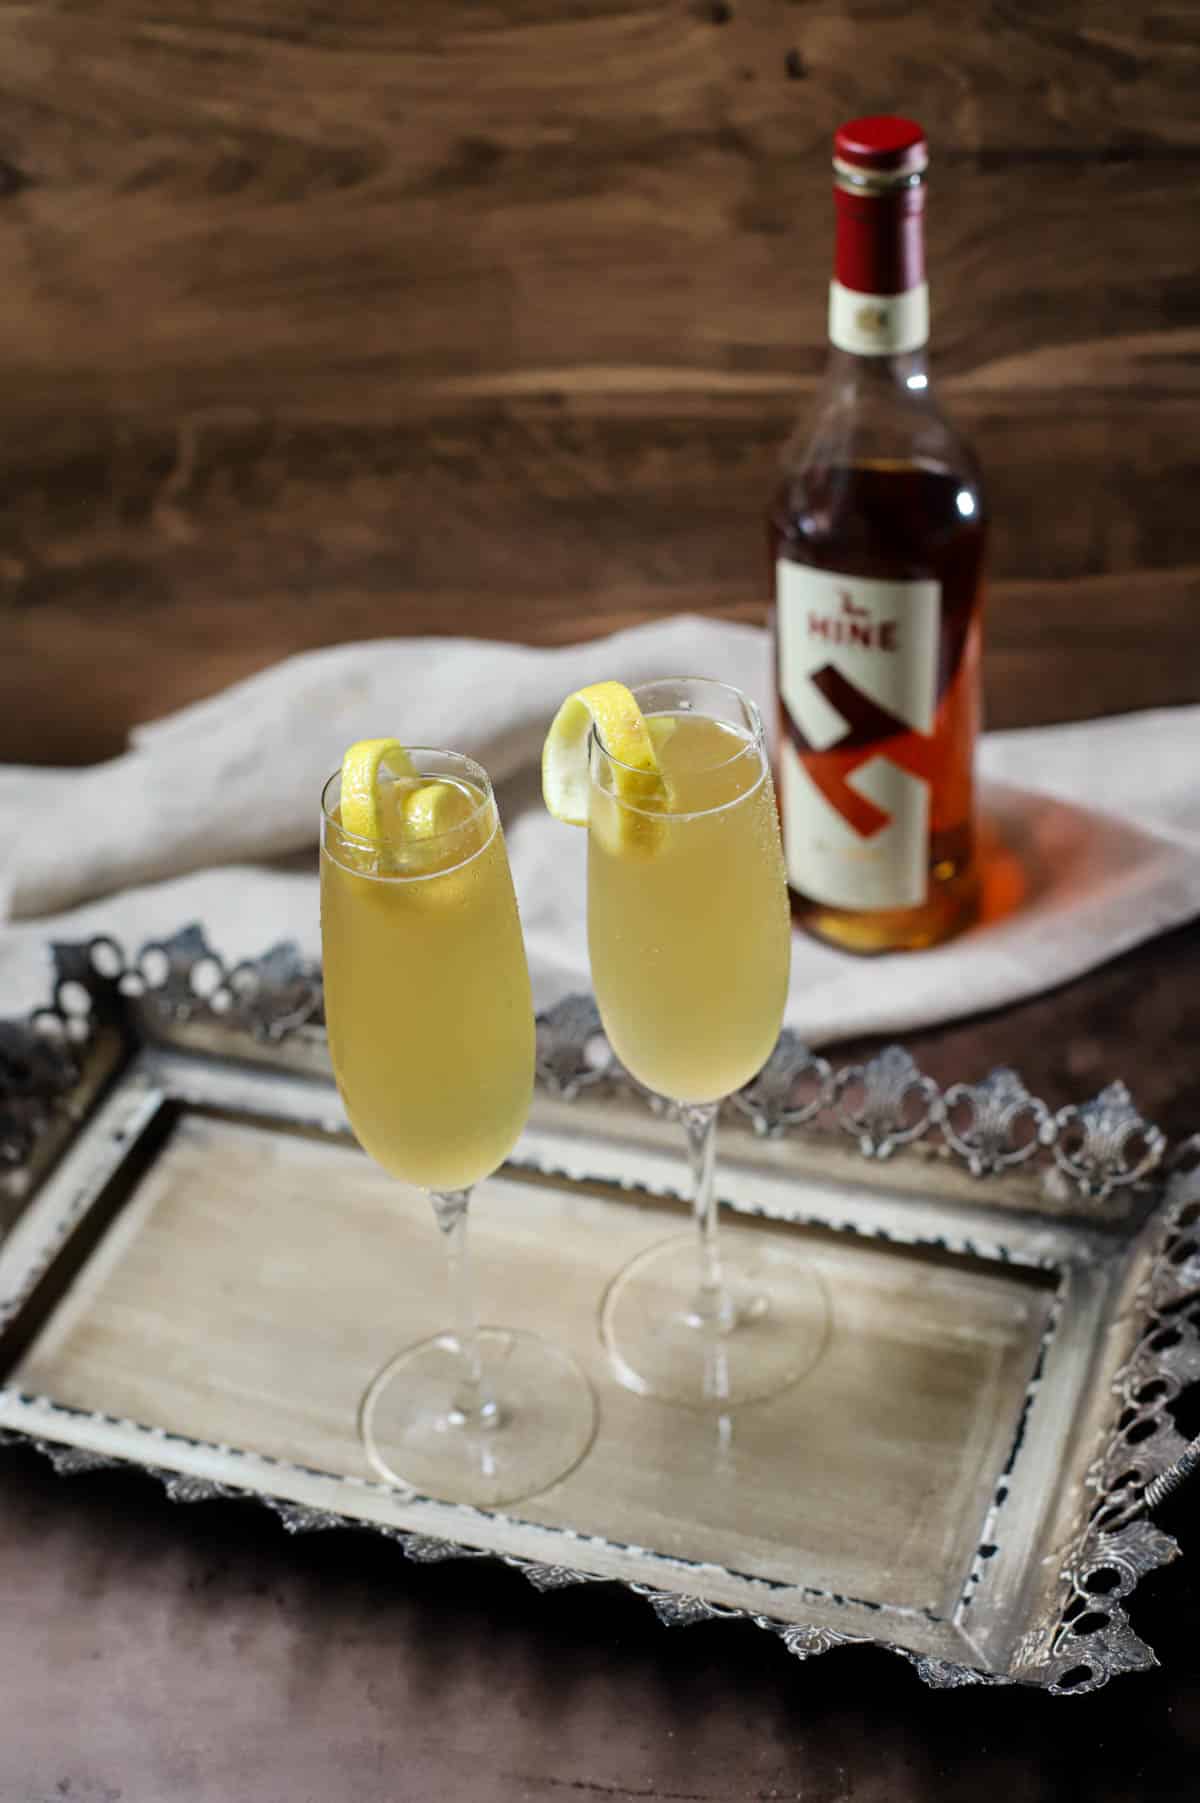 French 75 cocktail on a tray with bottle of cognac in back on dish towel.